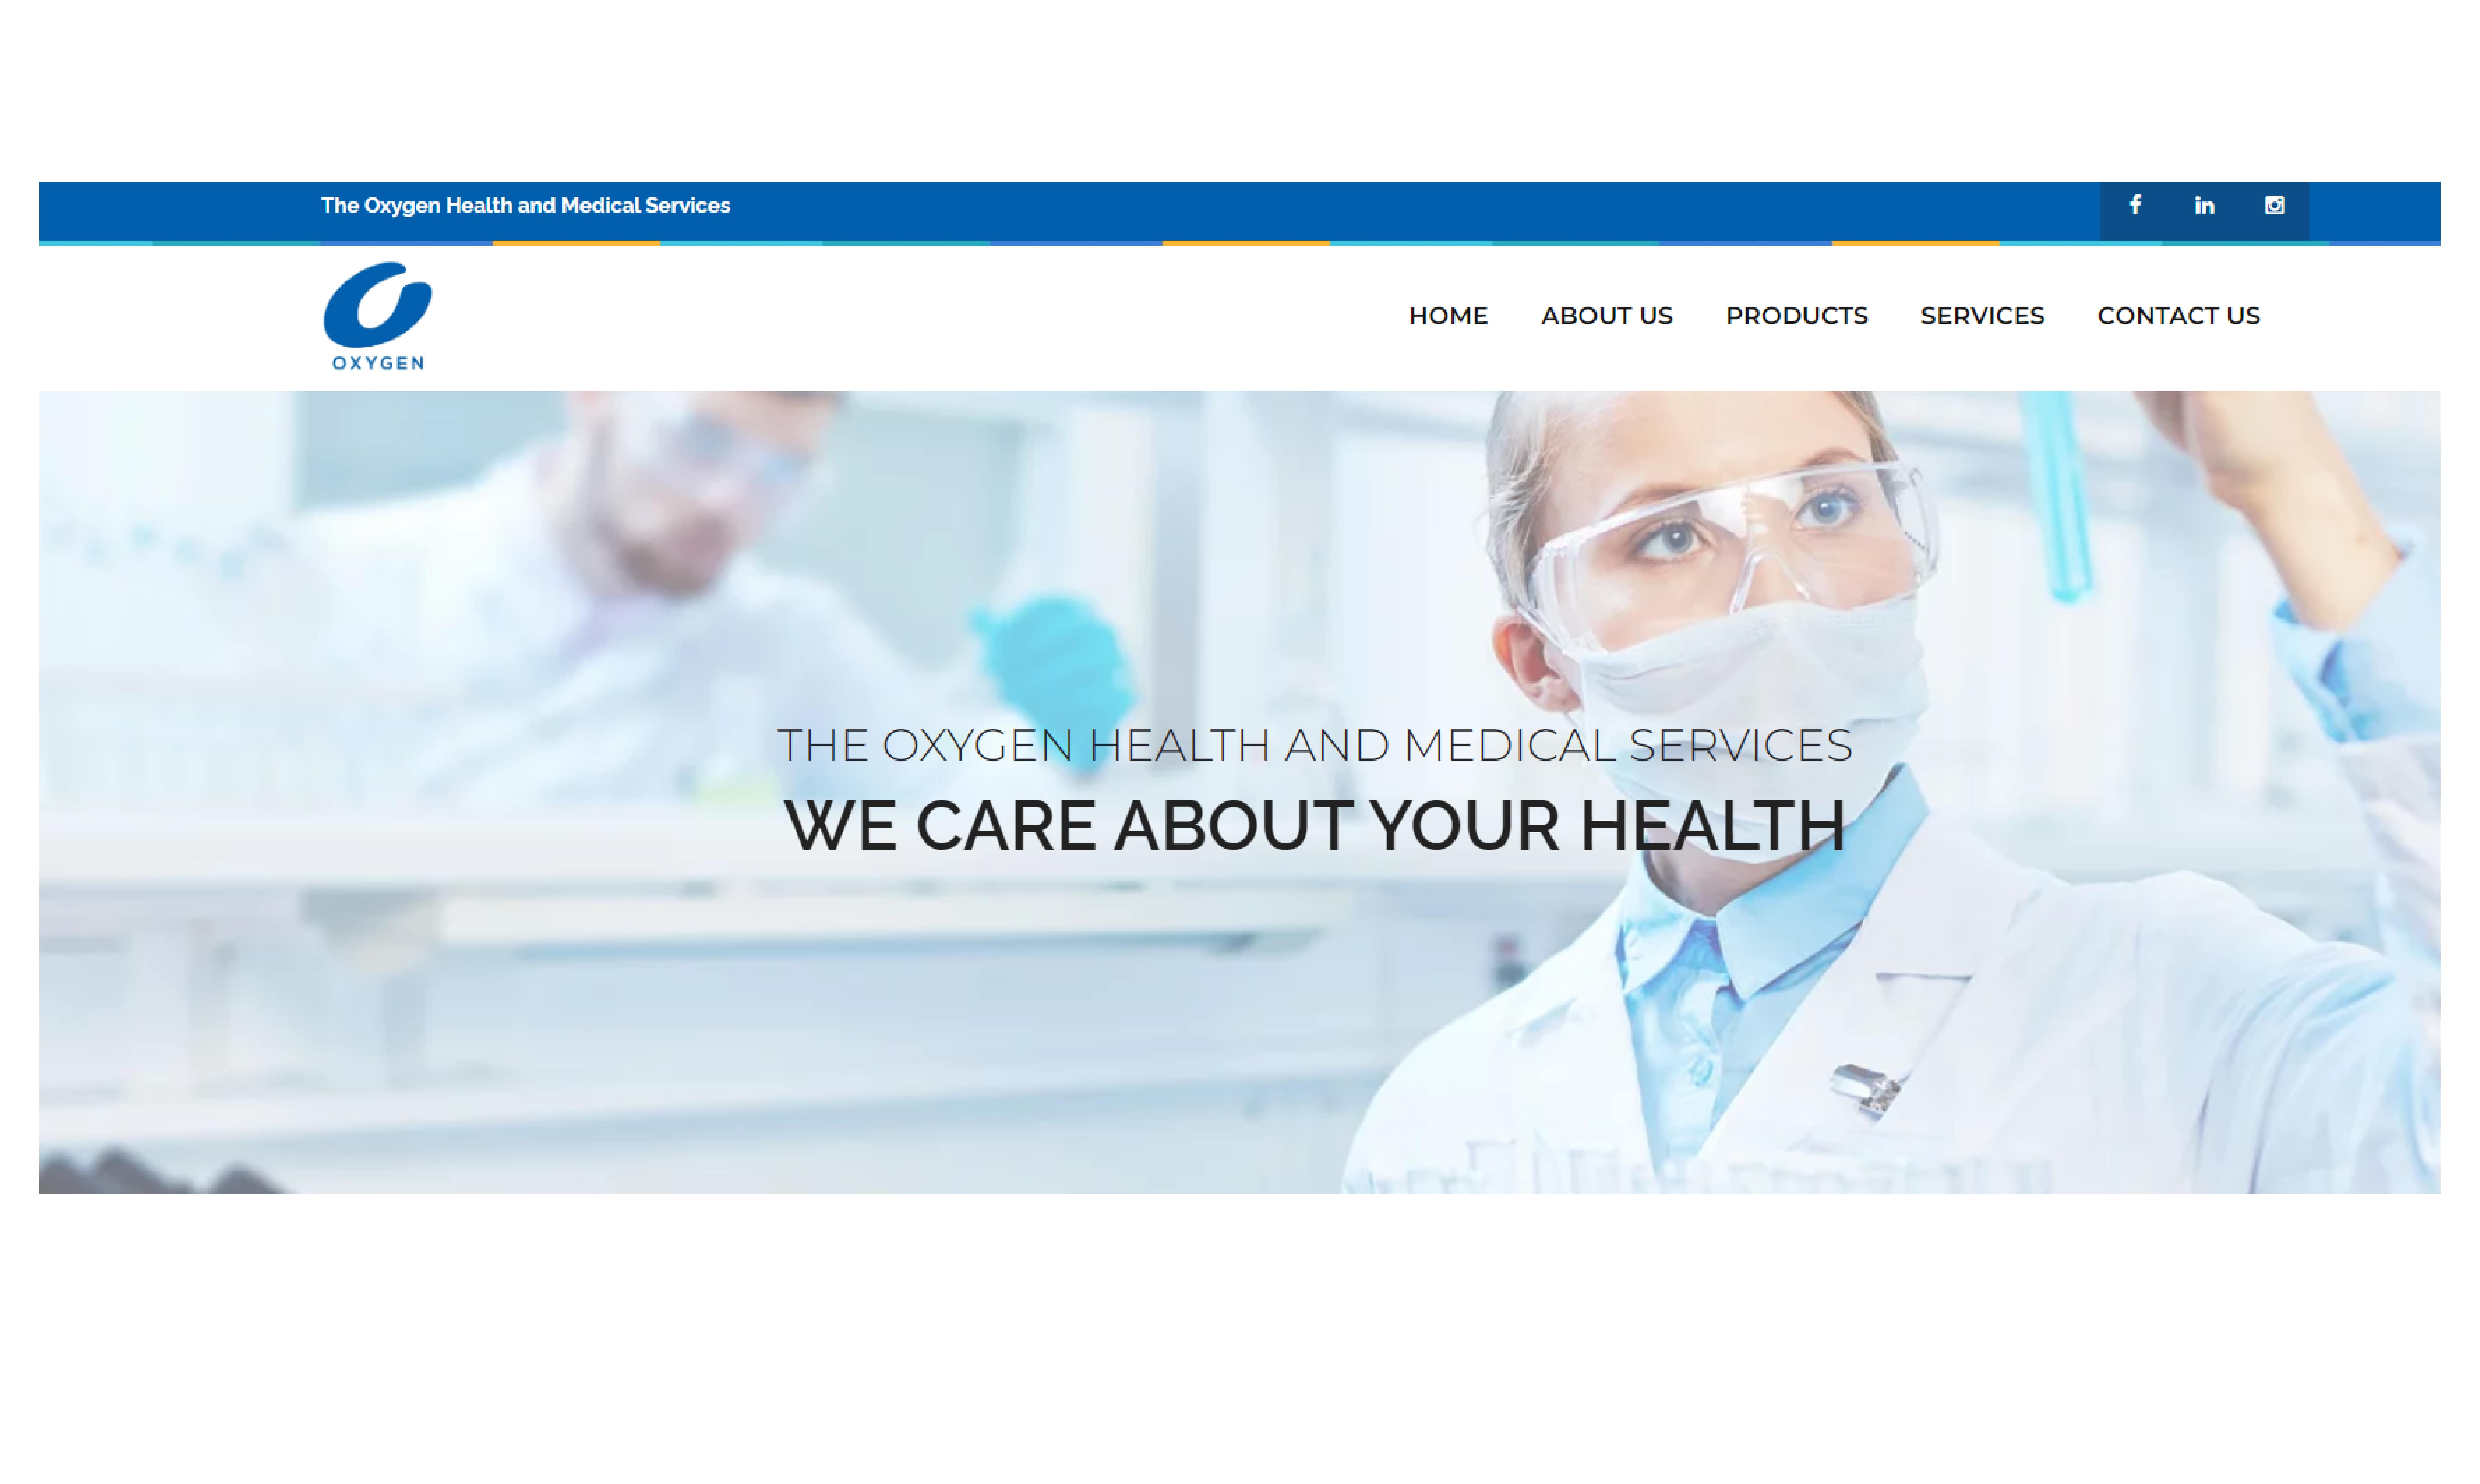 The Oxygen Health and Medical Services